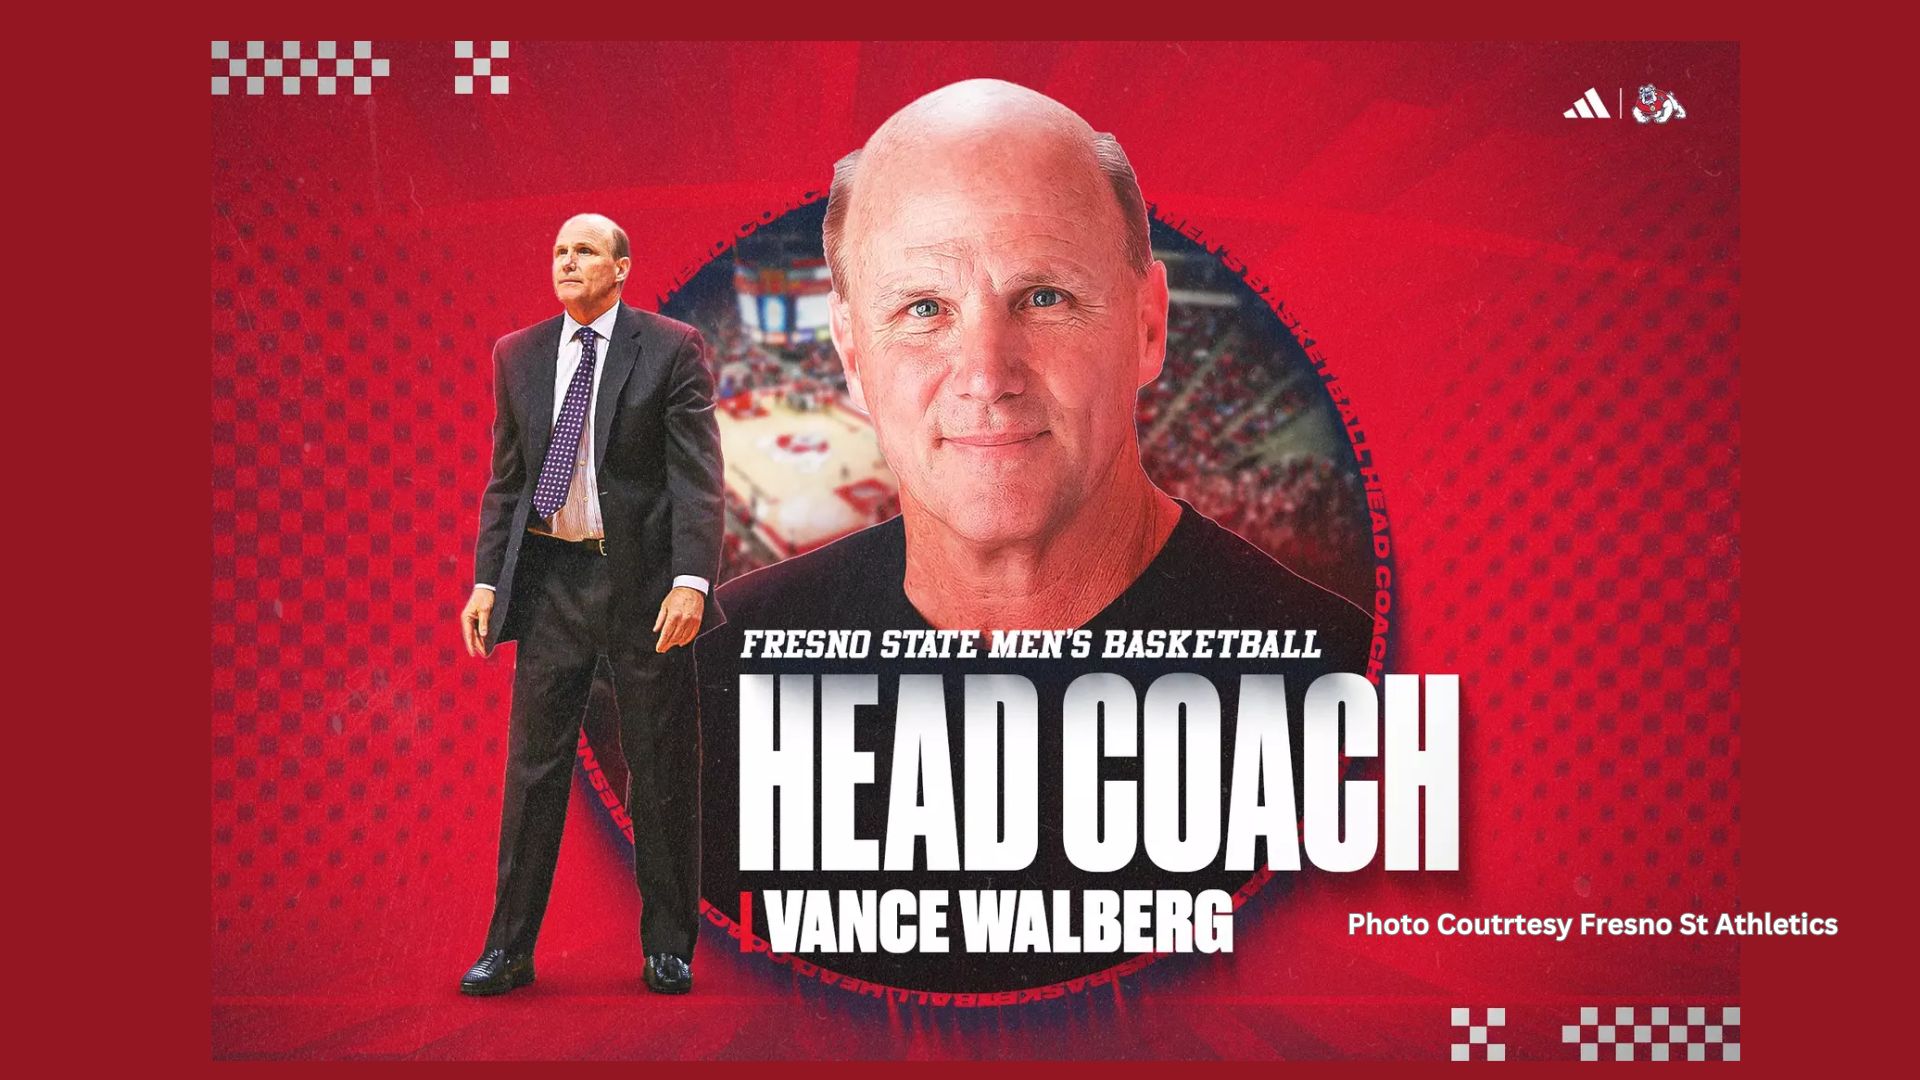 Vance Walberg Named 20th Head Coach Bringing Innovative Offense to Fresno State